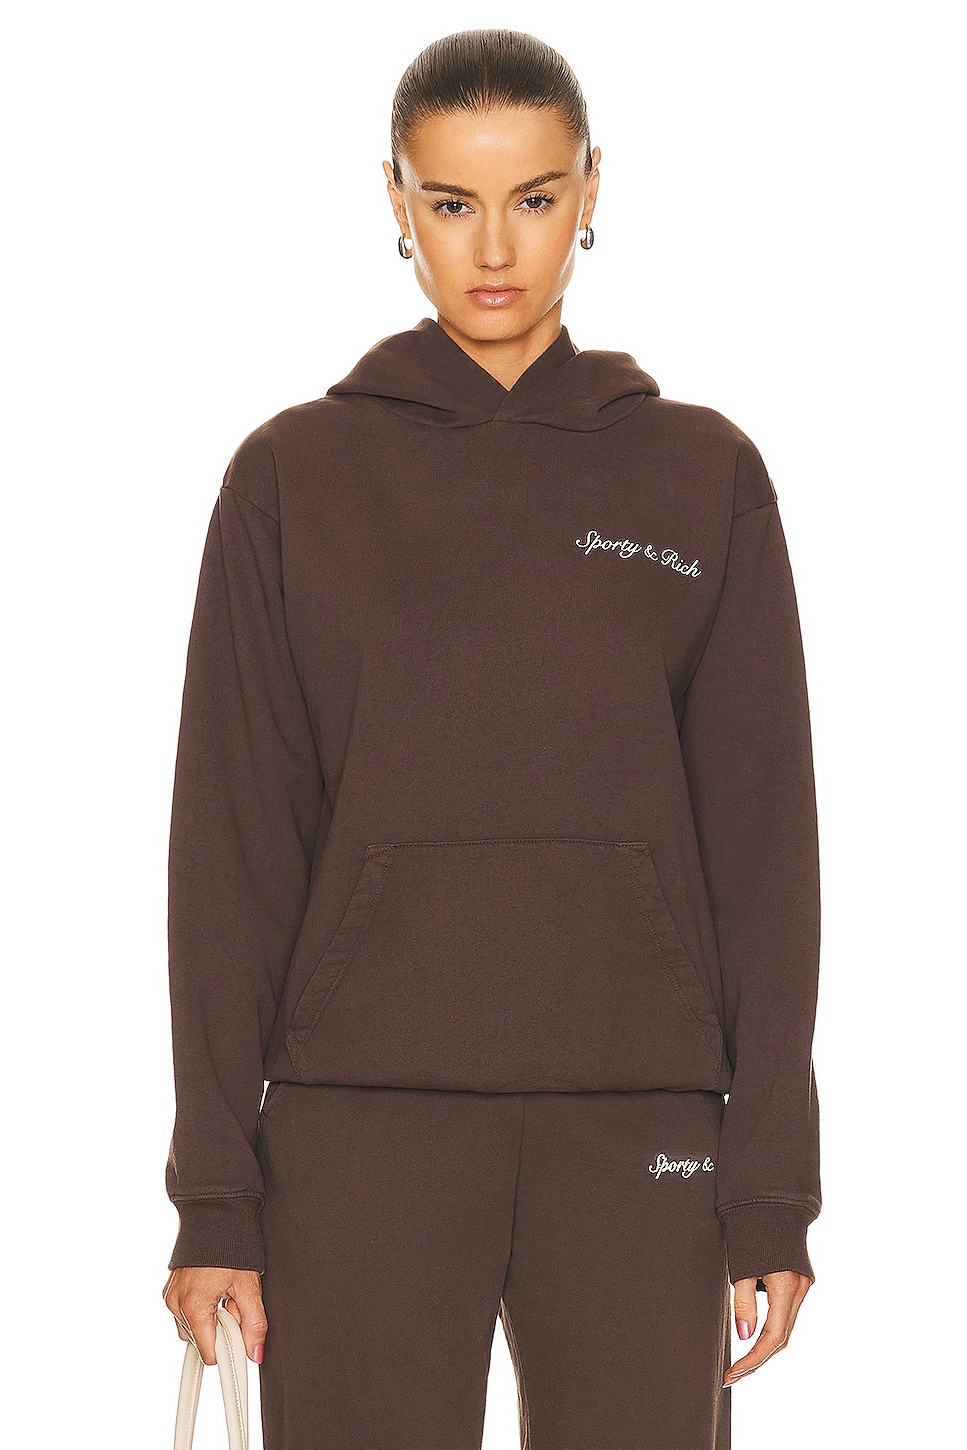 Image 1 of Sporty & Rich Syracuse Hoodie in Chocolate